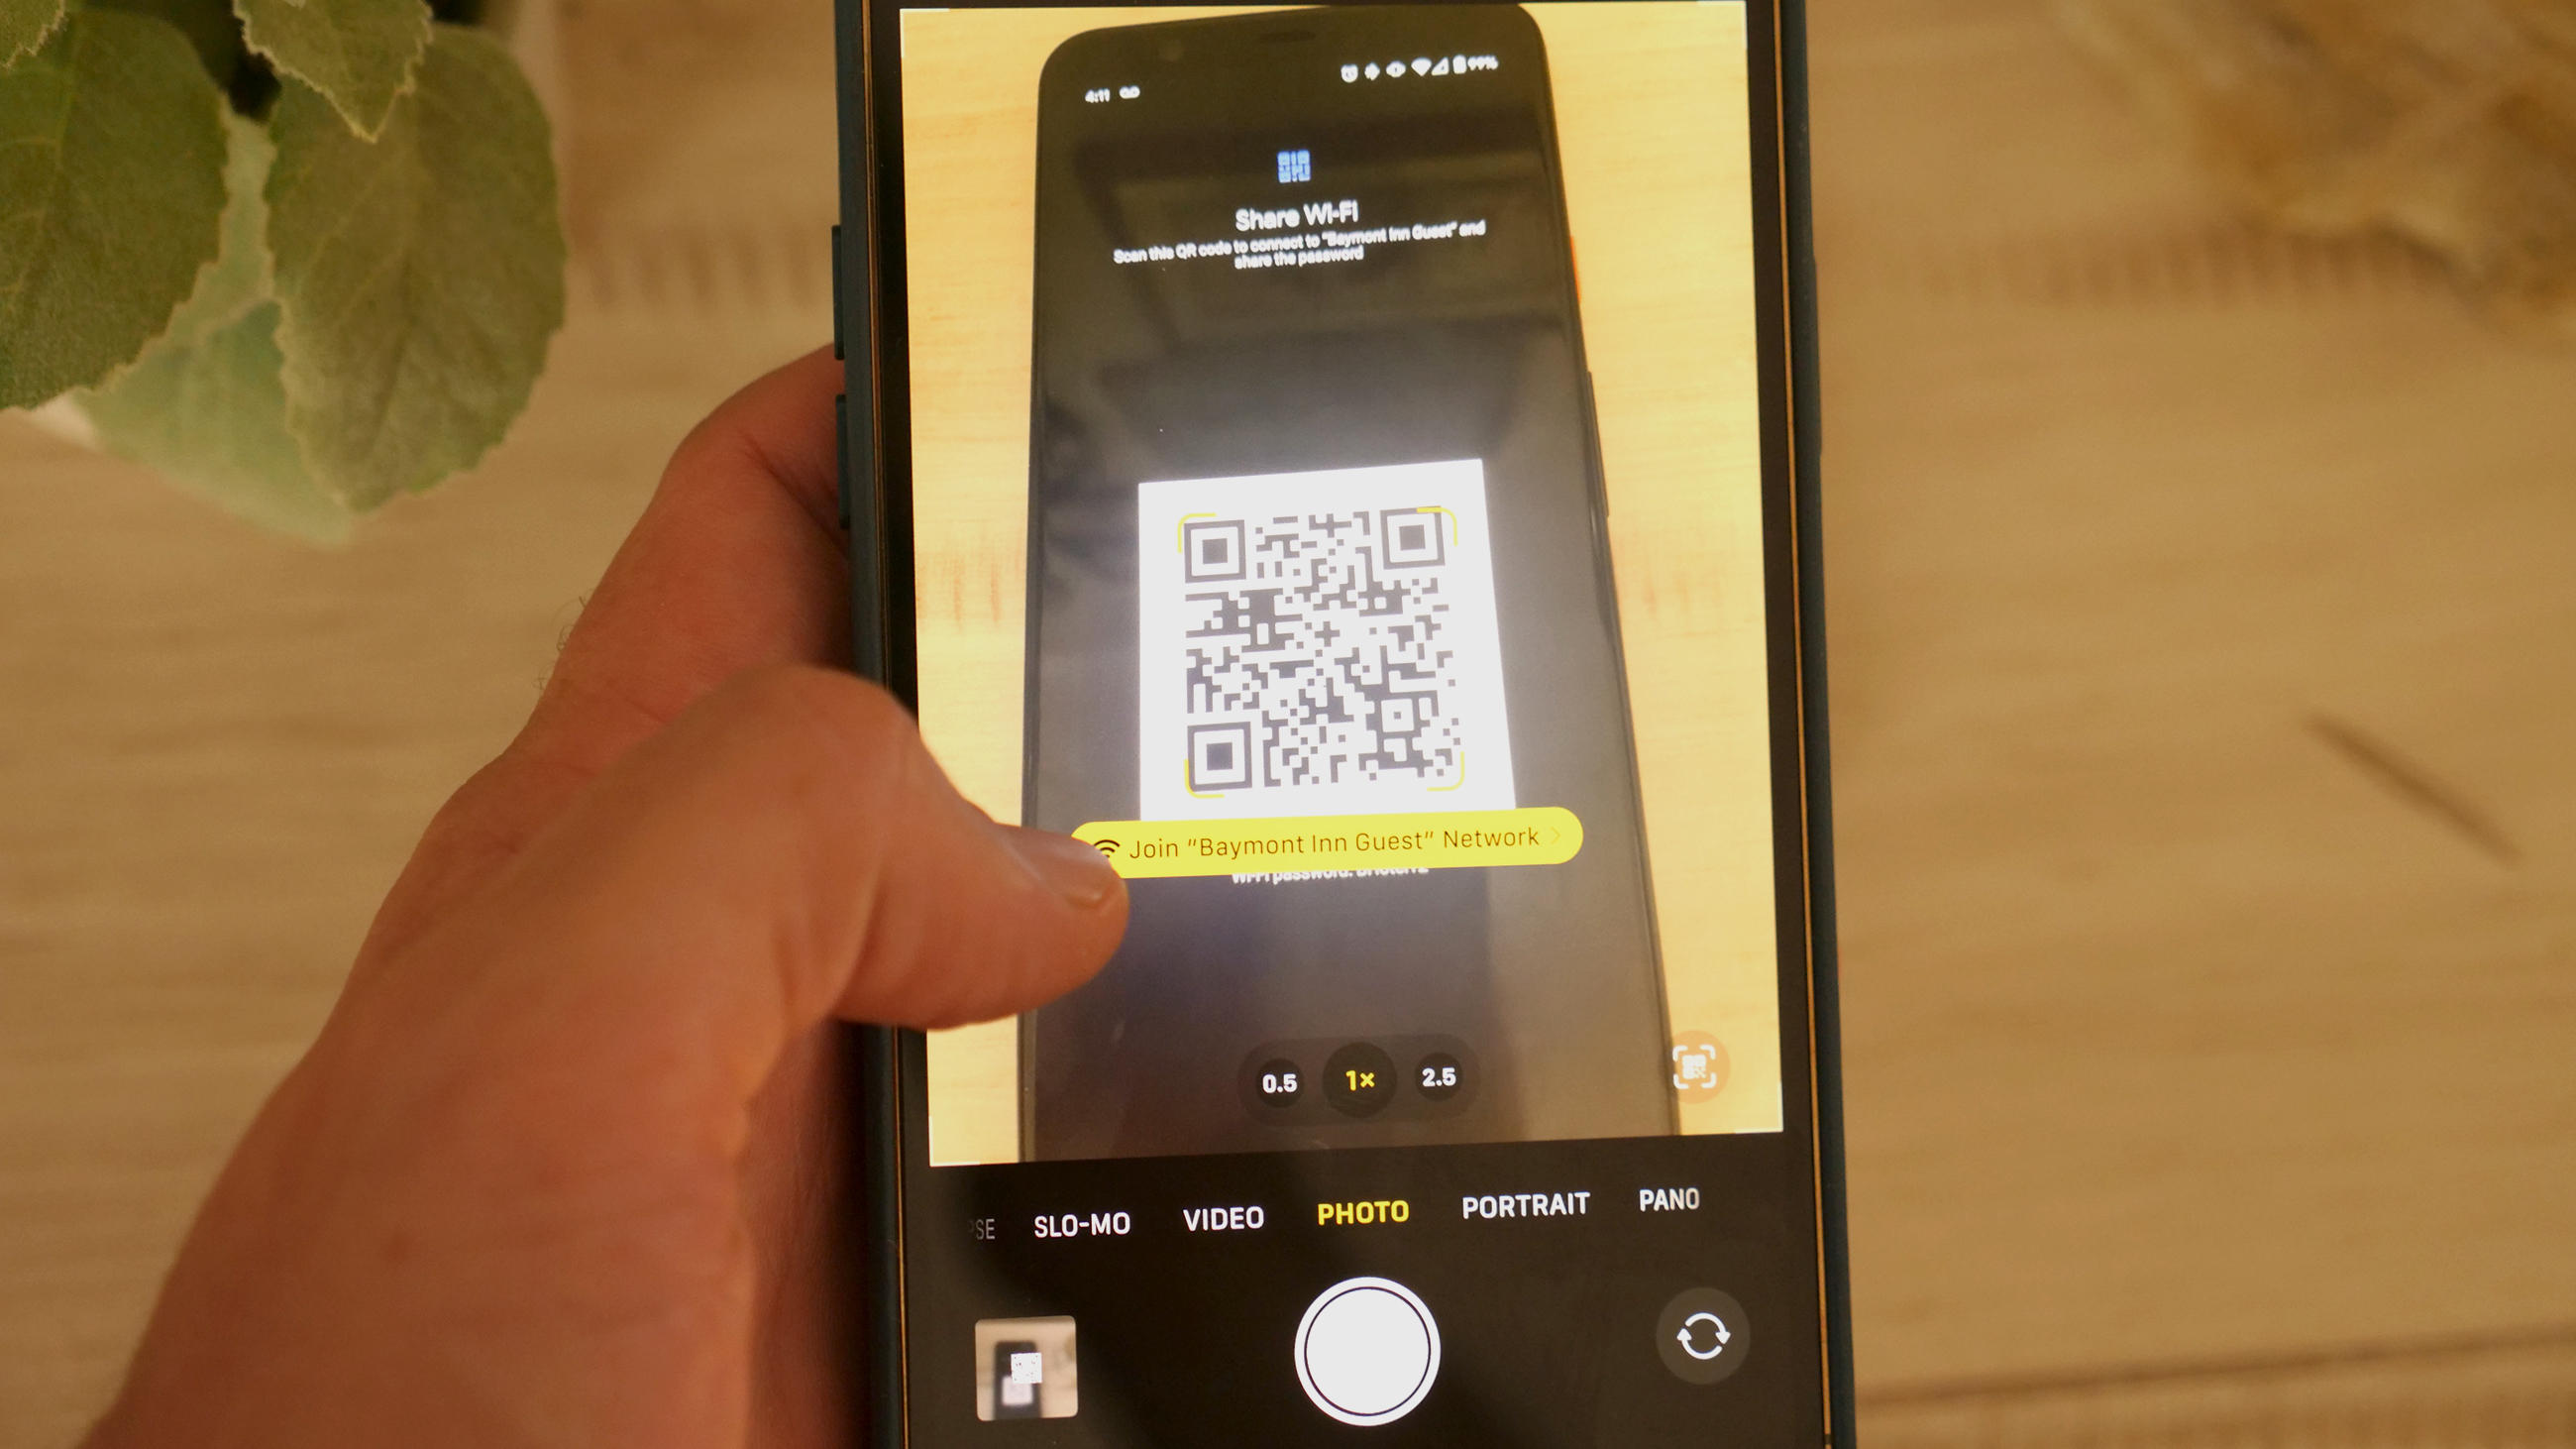 How to scan qr code on iphone